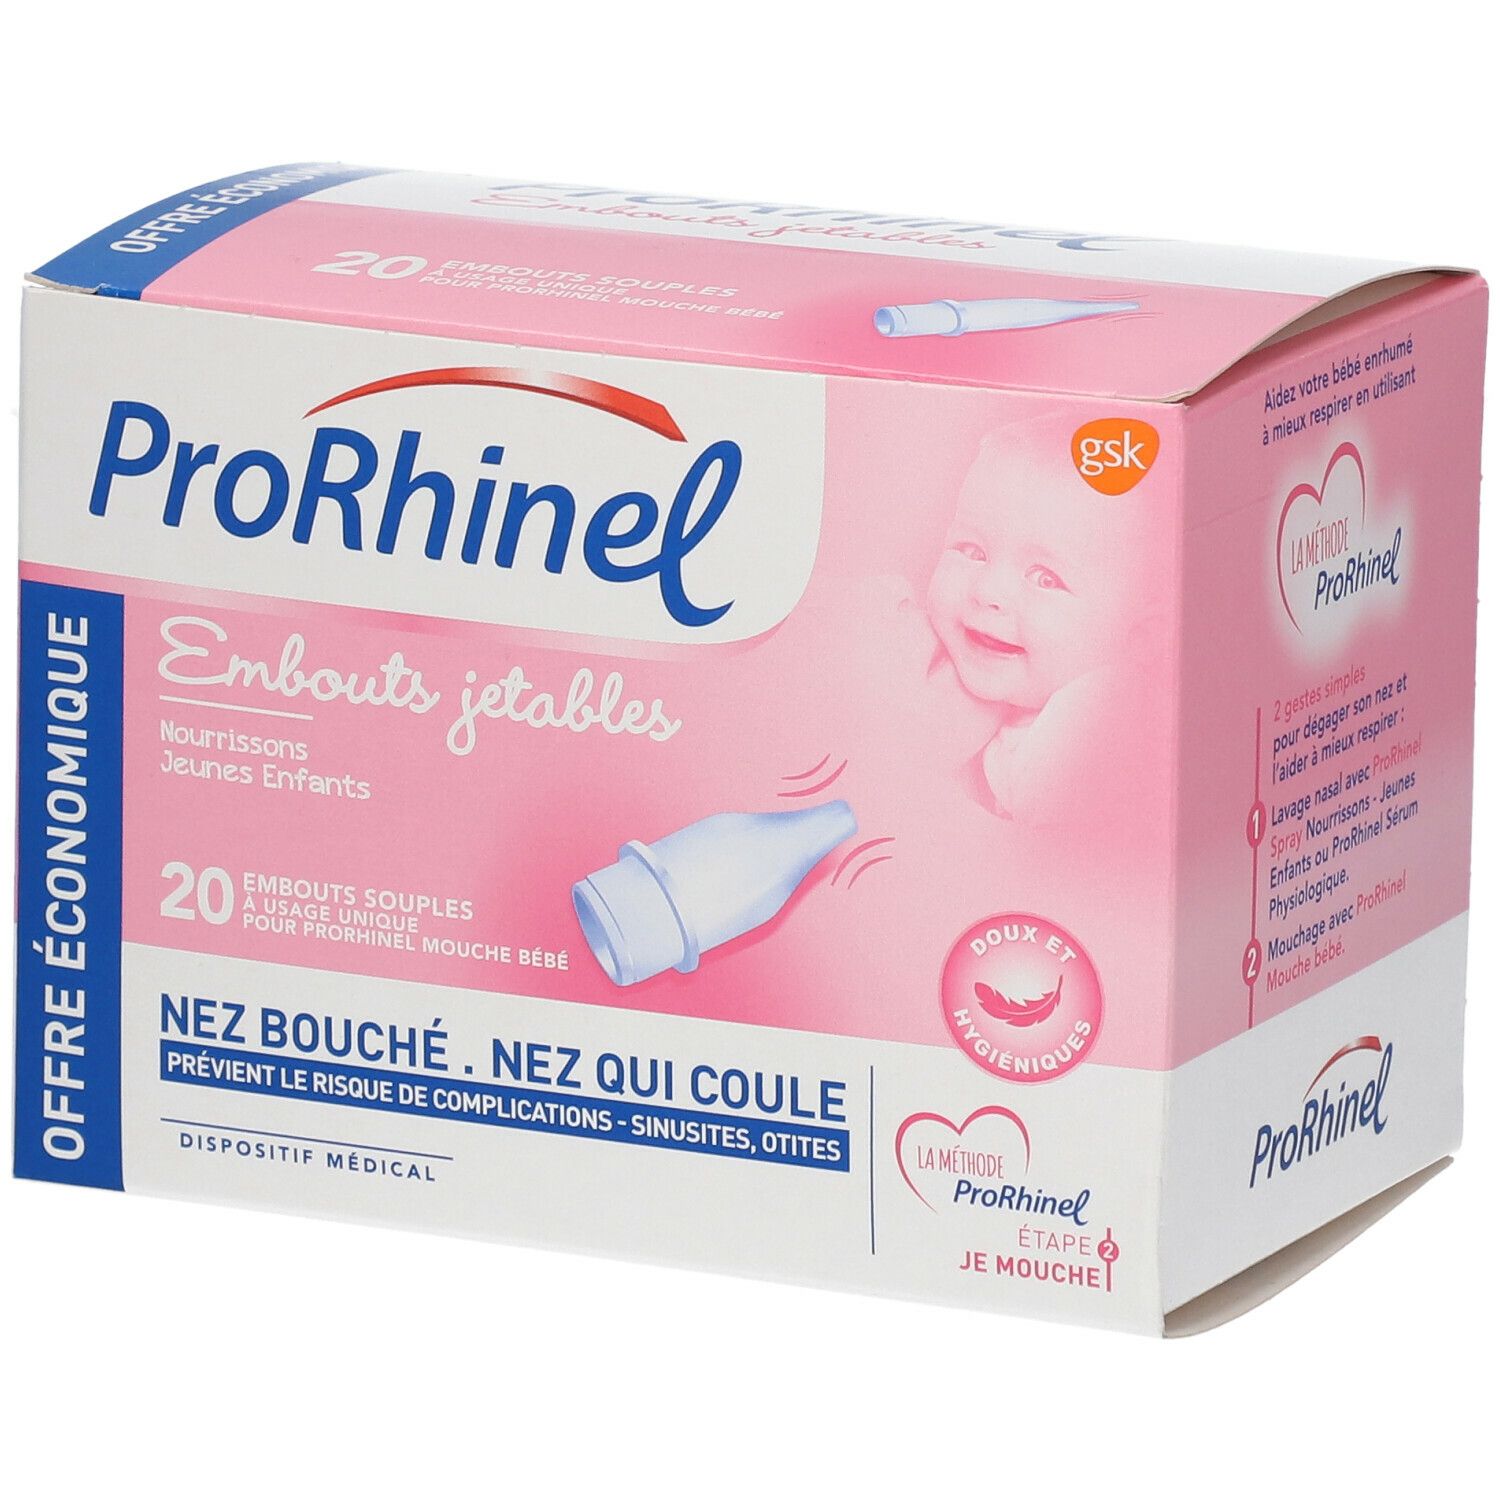 ProRhinel® embouts jetables souples 20 pc(s) - Redcare Pharmacie